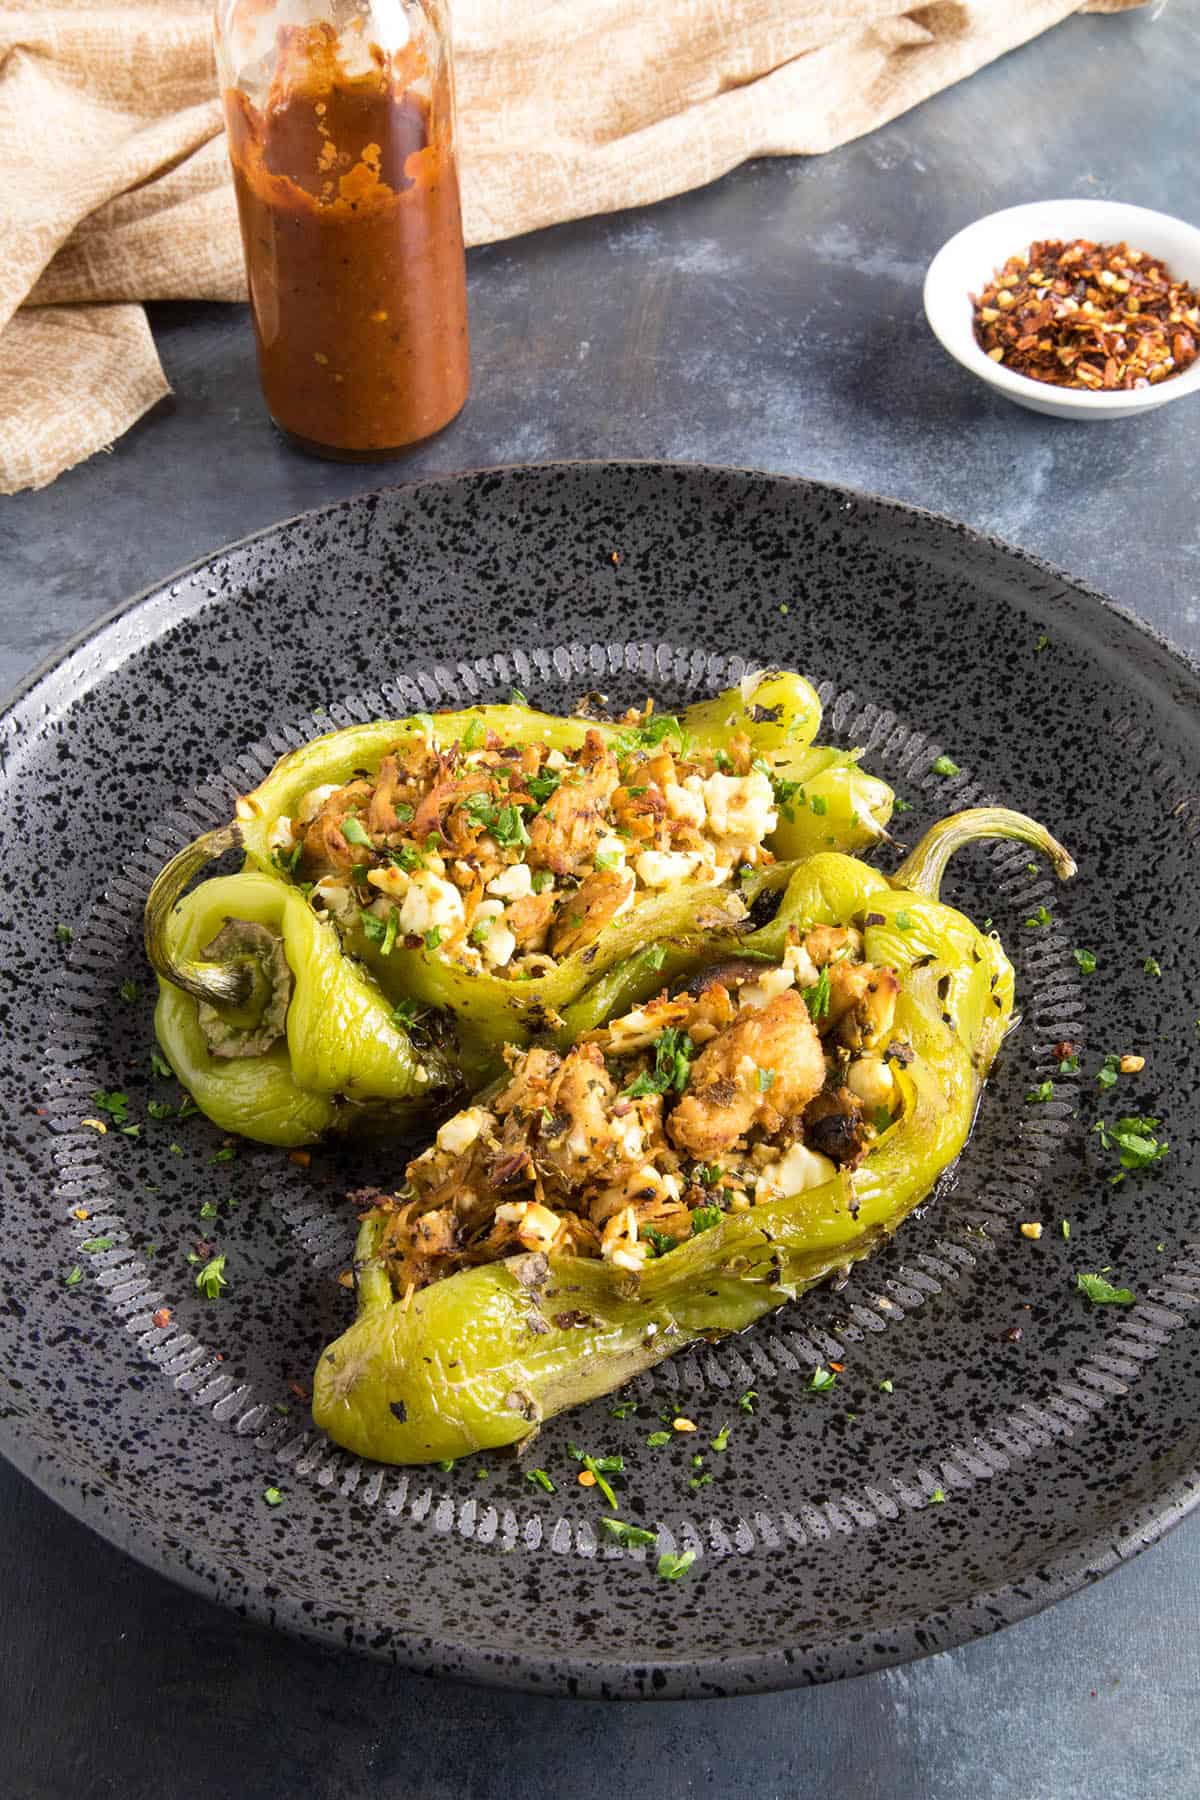 Chicken and Cheese Stuffed Anaheim Peppers - Served up on a plate with hot sauce on the side